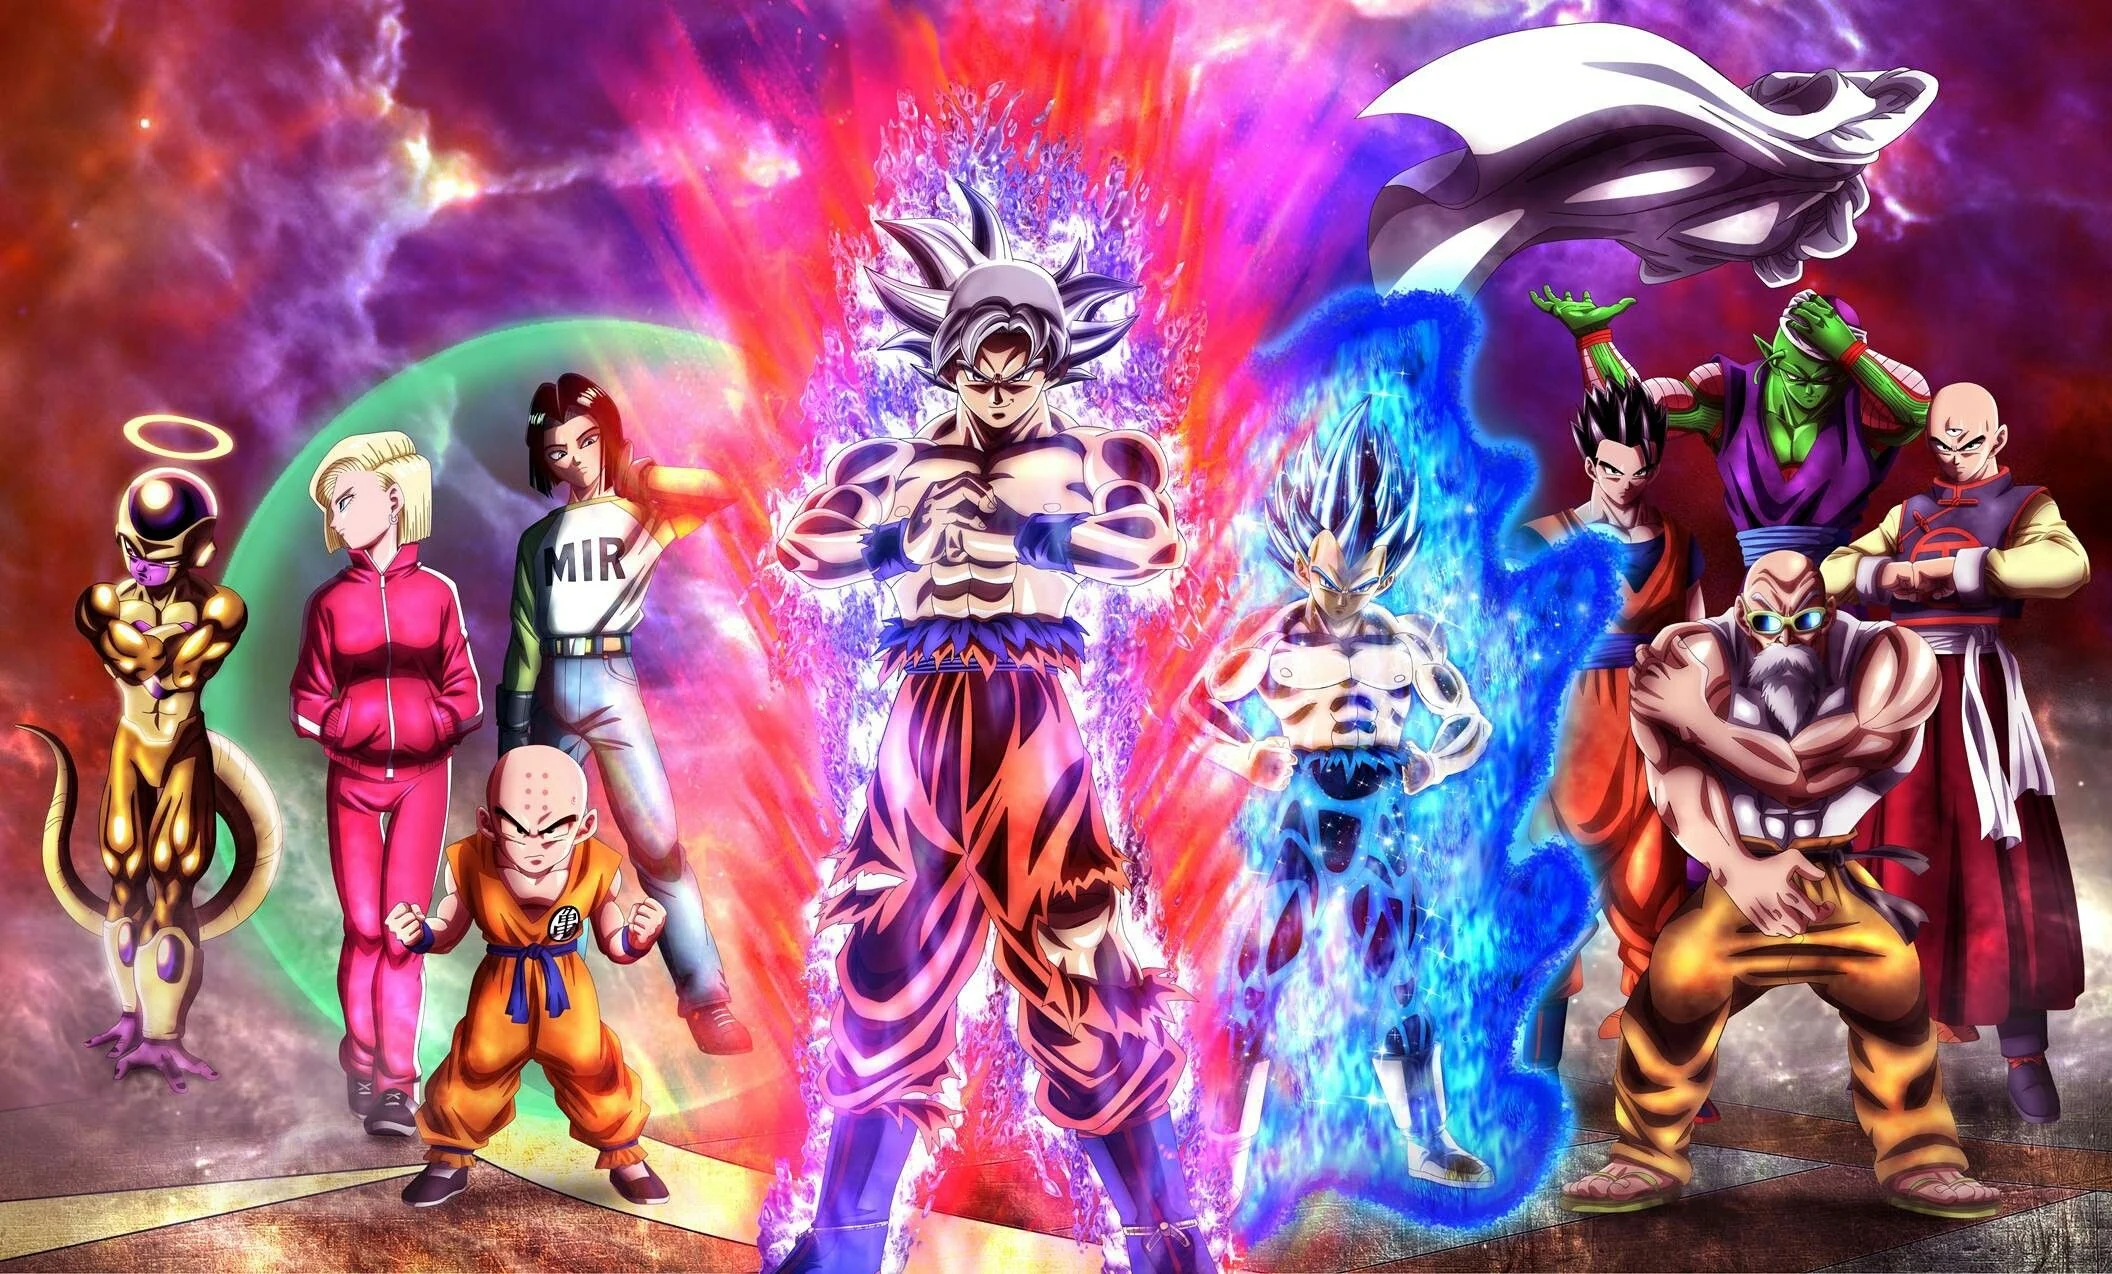 Universe 7's Power-Up: Will Goku, Vegeta, and Frieza's New Forms Dominate the Next Epic Showdown?